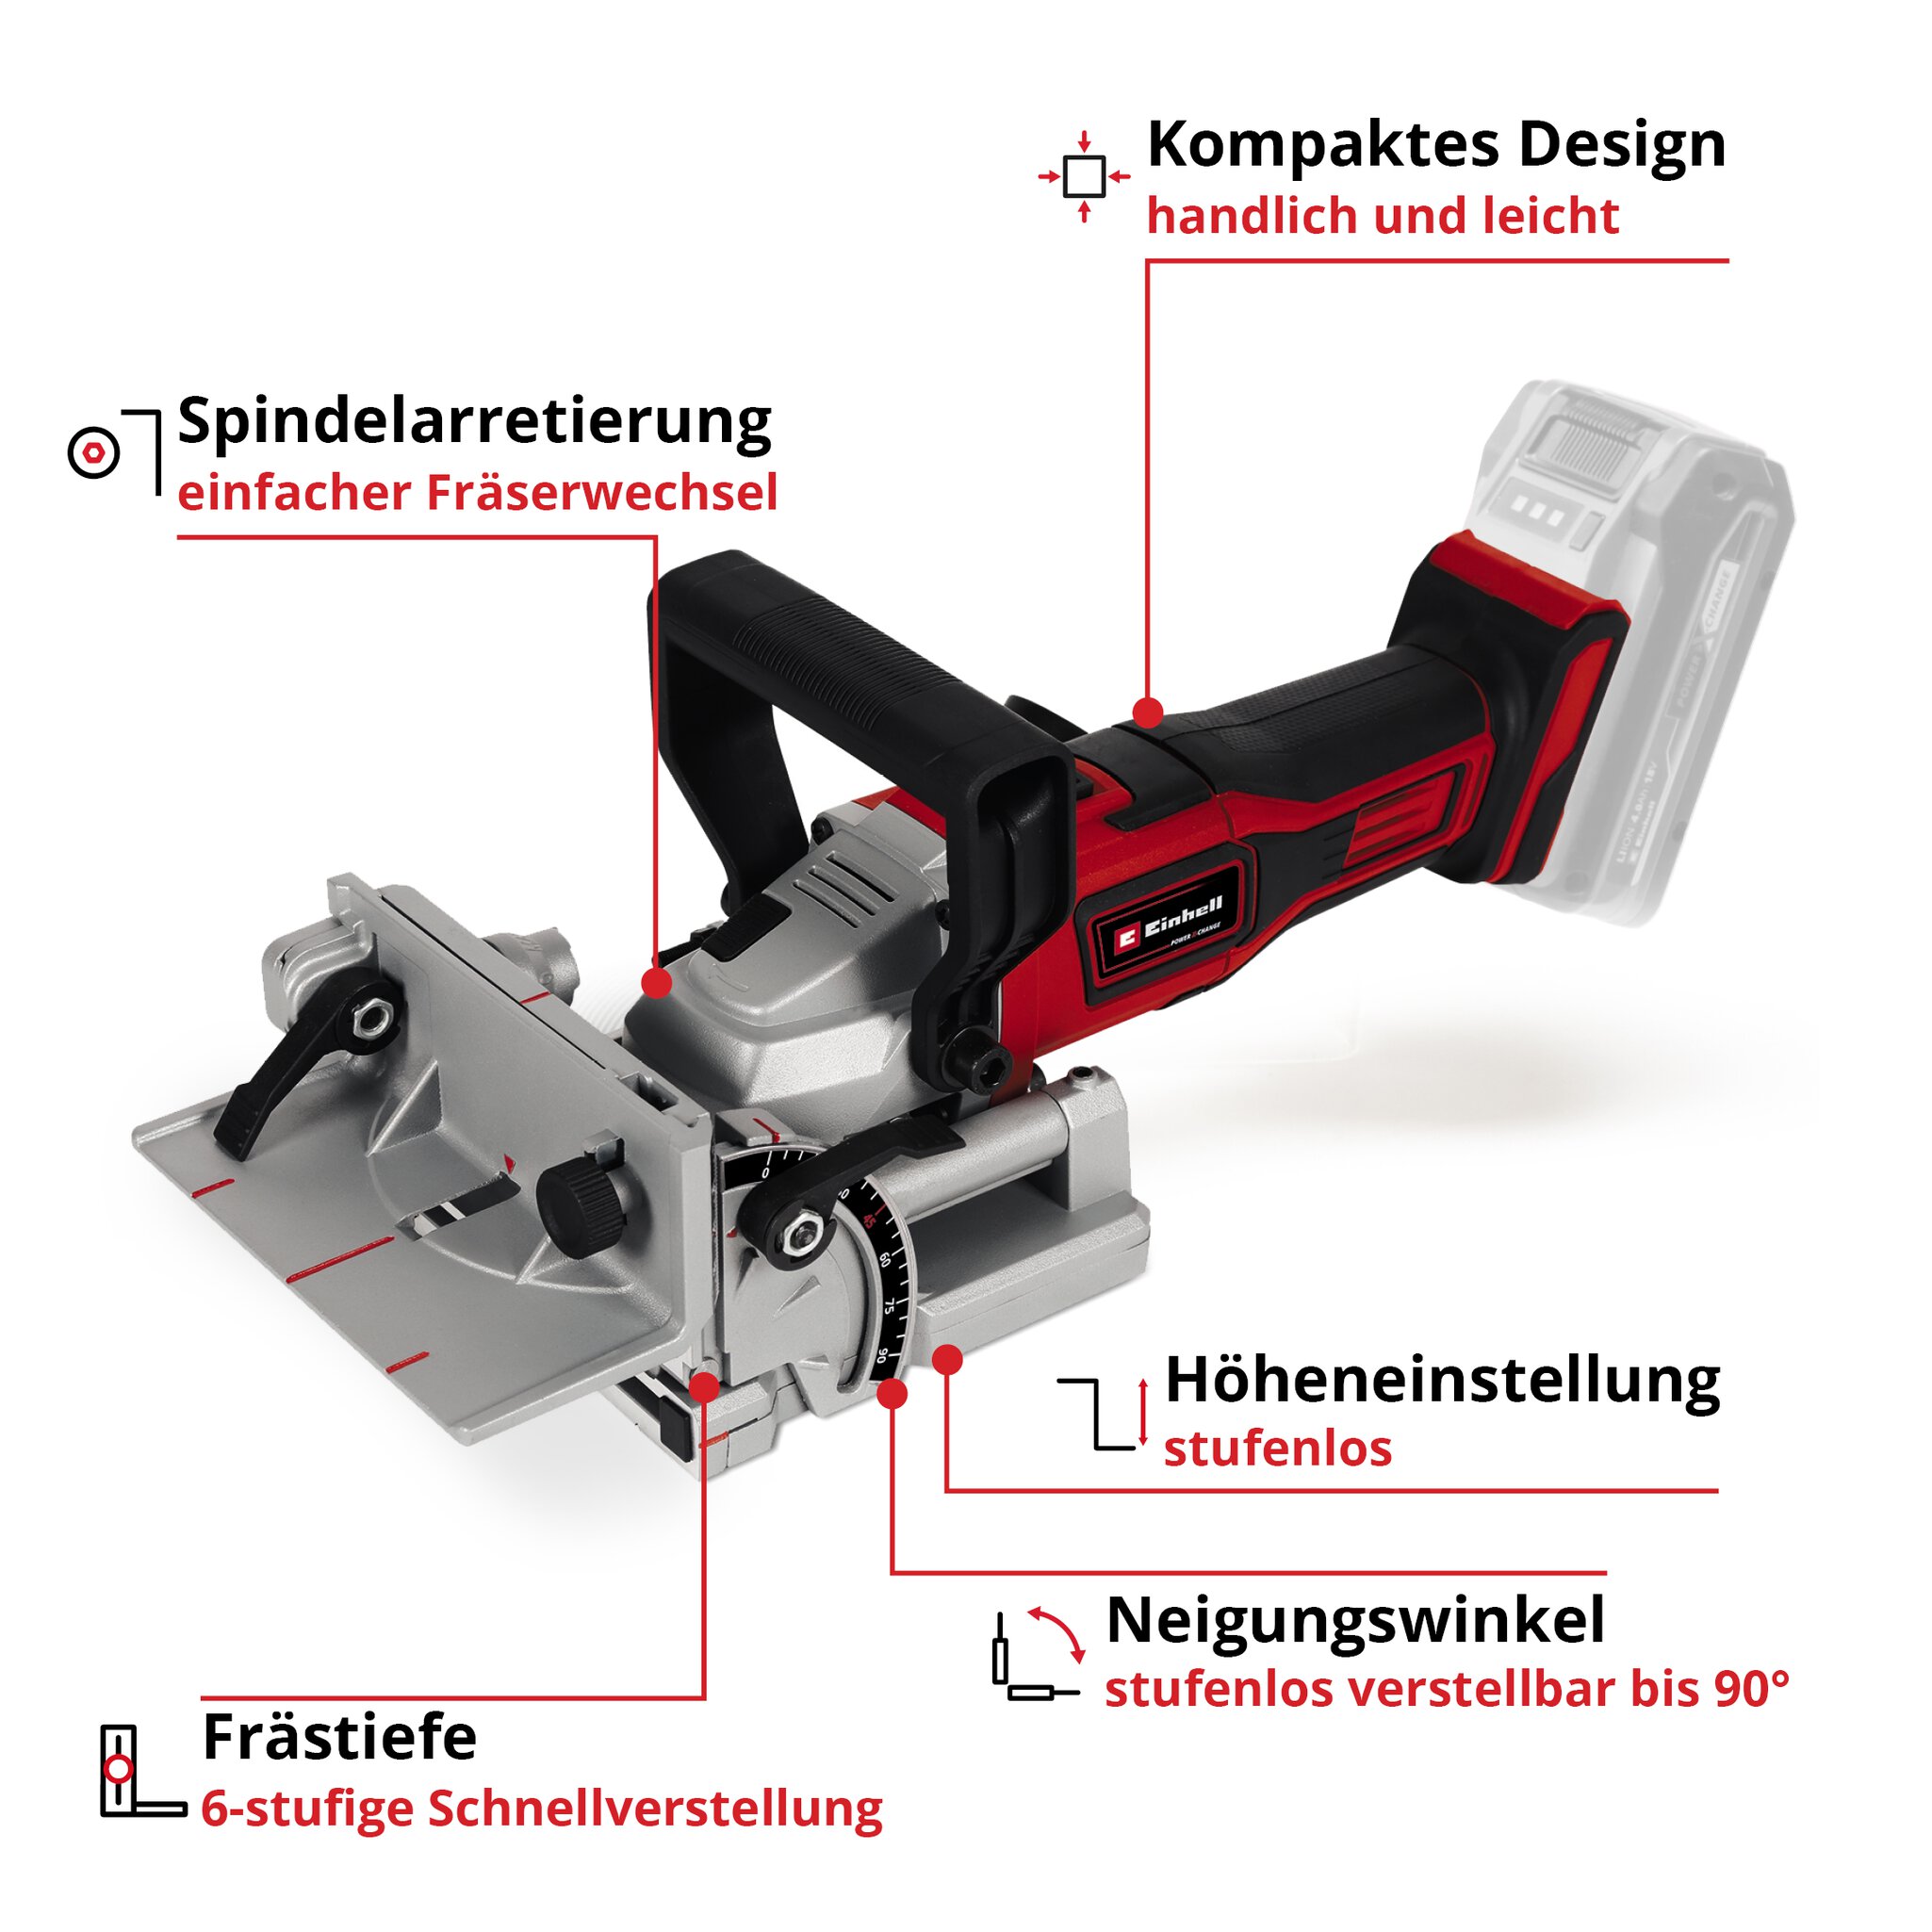 einhell-expert-cordless-biscuit-jointer-4350630-key_feature_image-001